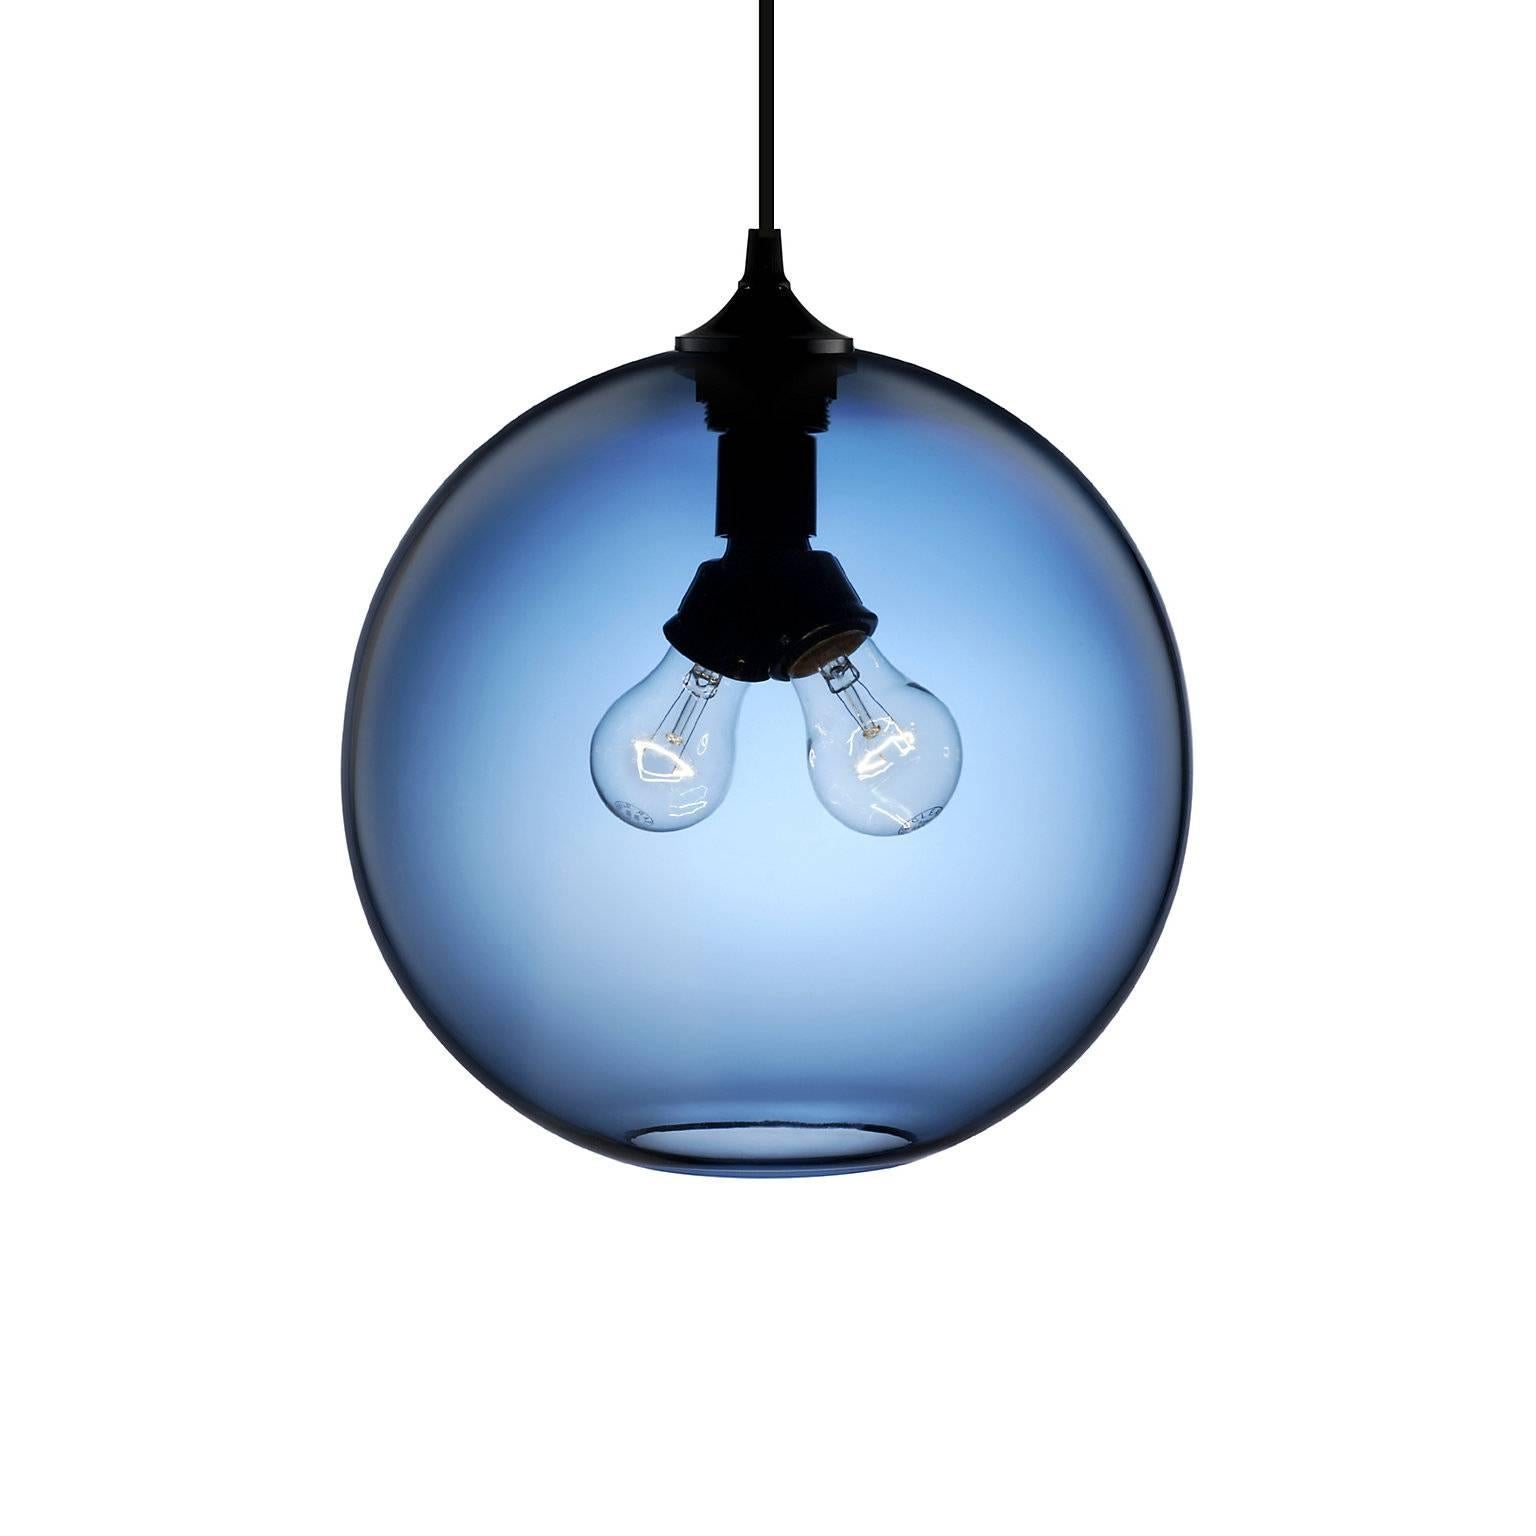 Contemporary Binary Amber Handblown Modern Glass Pendant Light, Made in the USA For Sale